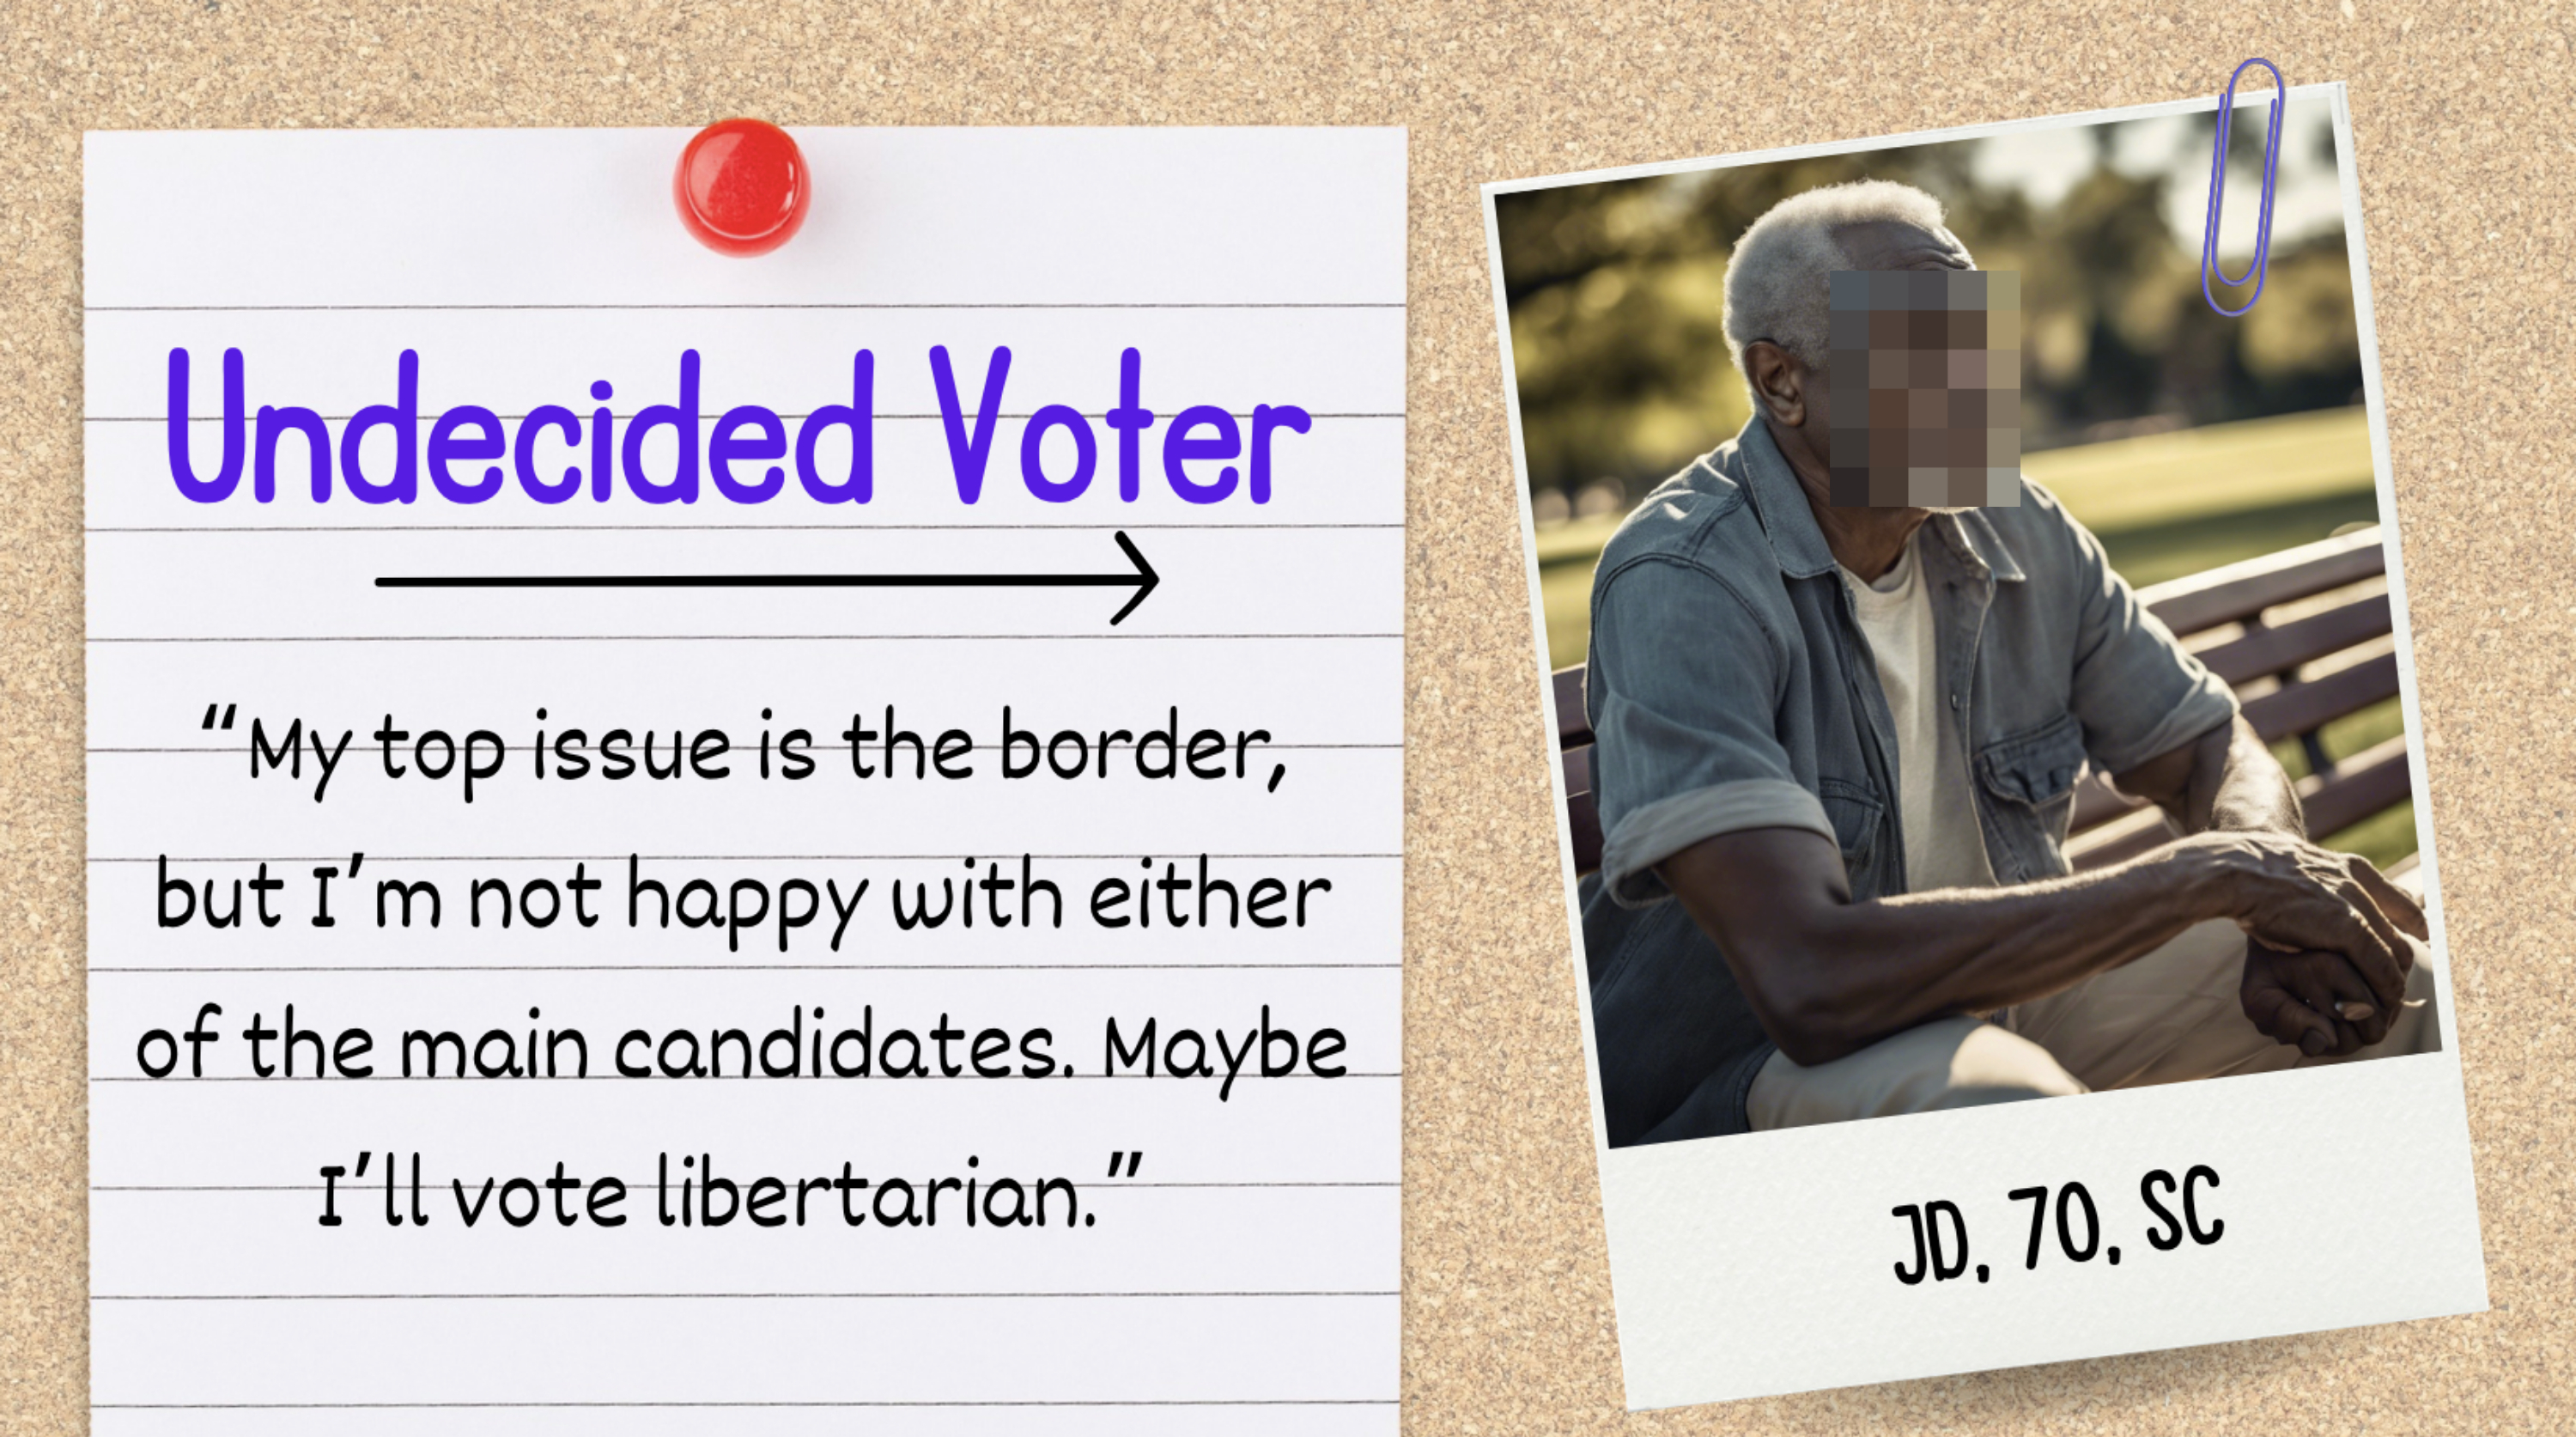 An undecided voter&#x27;s statement pinned on board; elderly man sitting on bench. Text summary: Voter&#x27;s top issue is the border, considers libertarian vote